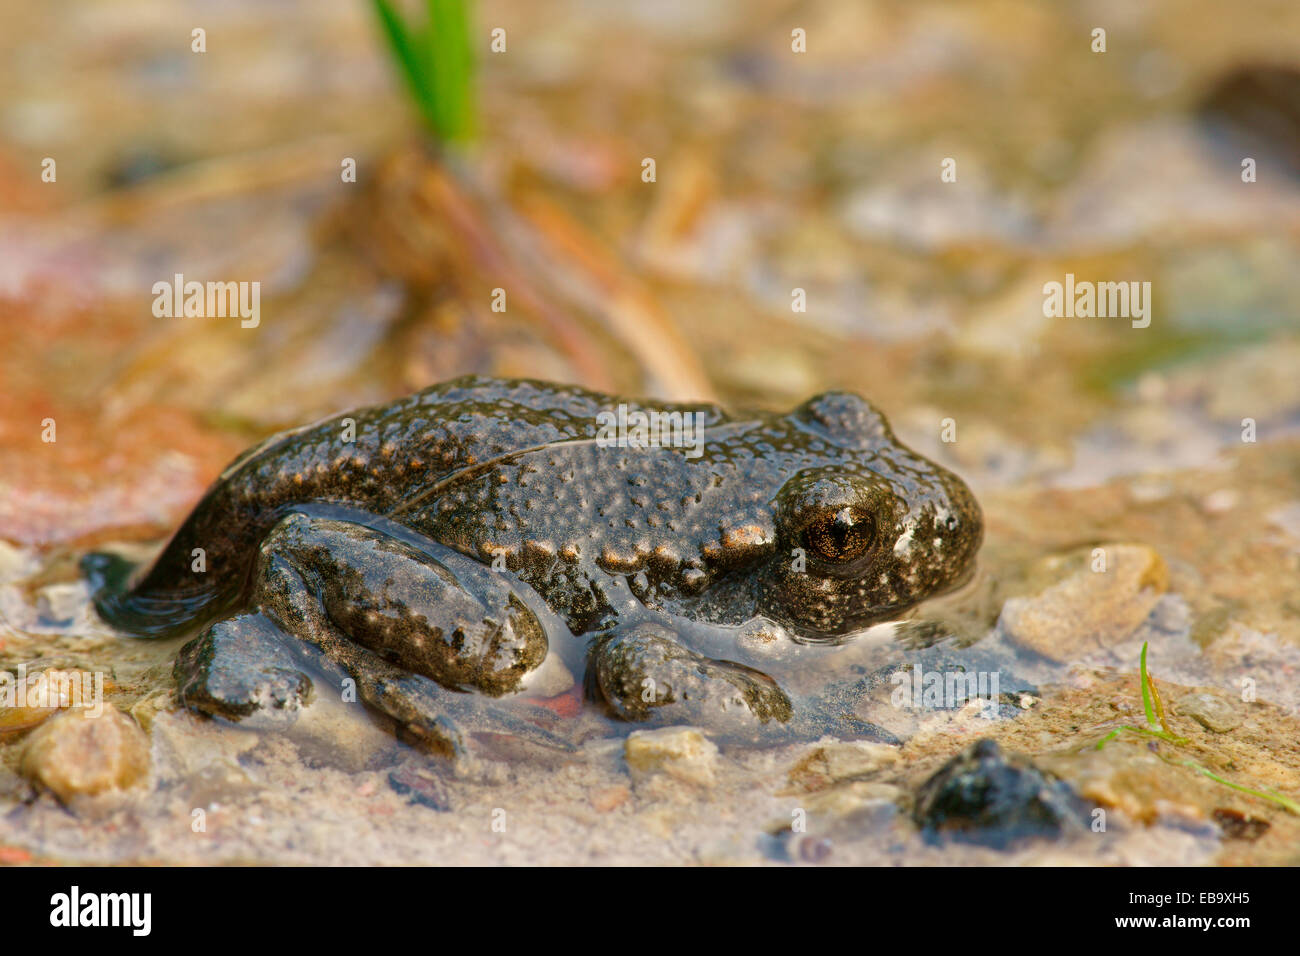 Common Midwife Toad (Alytes obstetricans), juvenile, Bad Hersfeld, Hesse, Germany Stock Photo